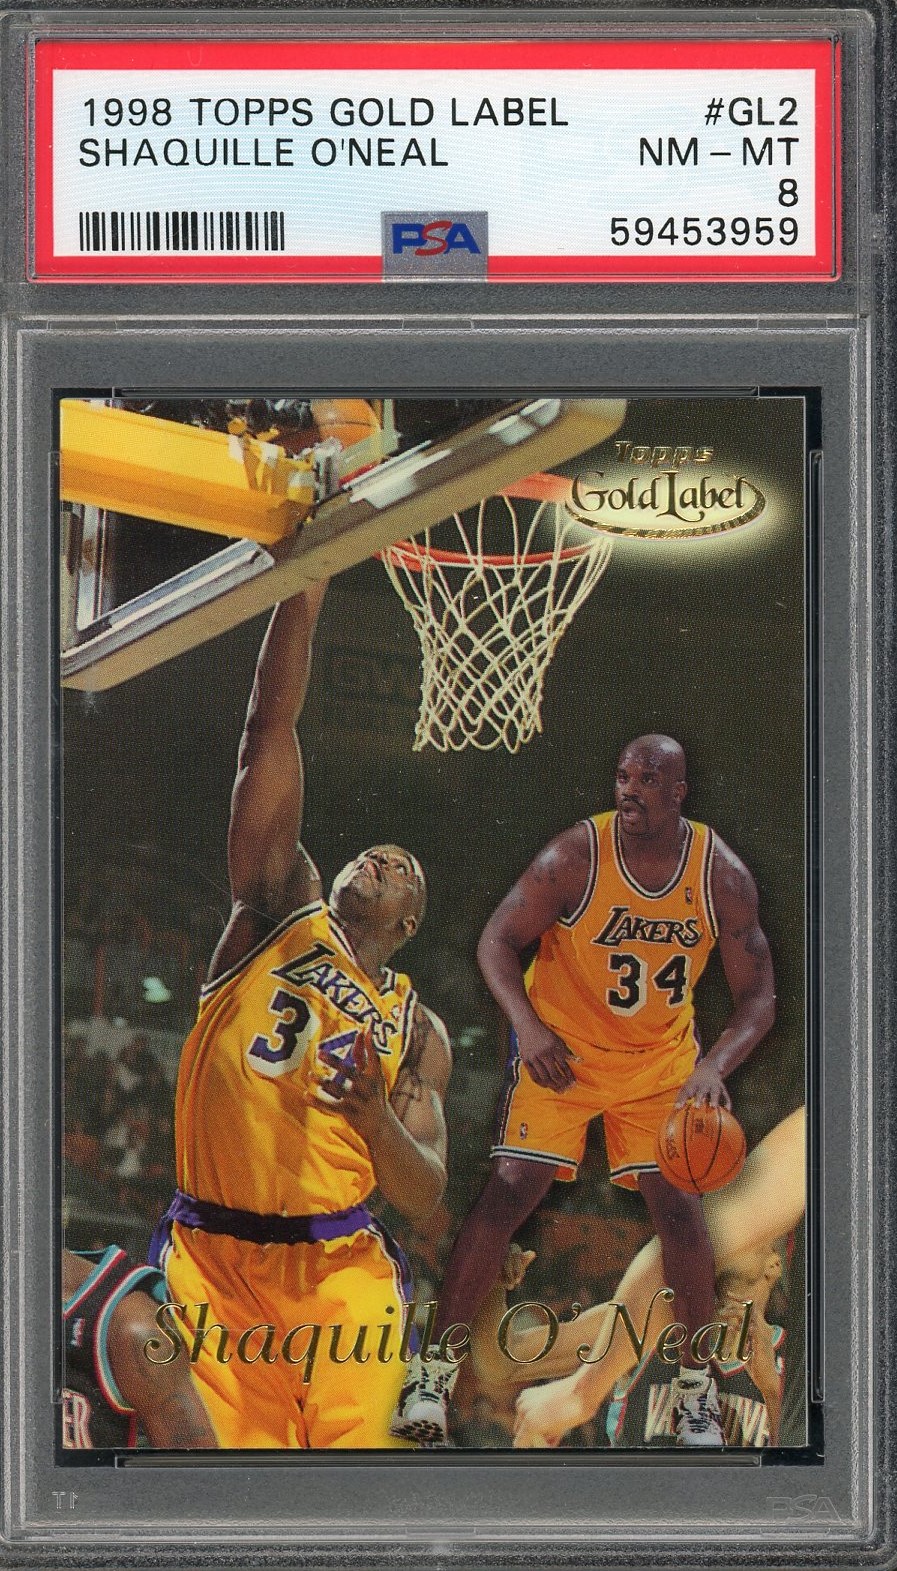 Shaquille O'Neal 1998 Topps Gold Label Basketball Card #GL2 Graded PSA 8